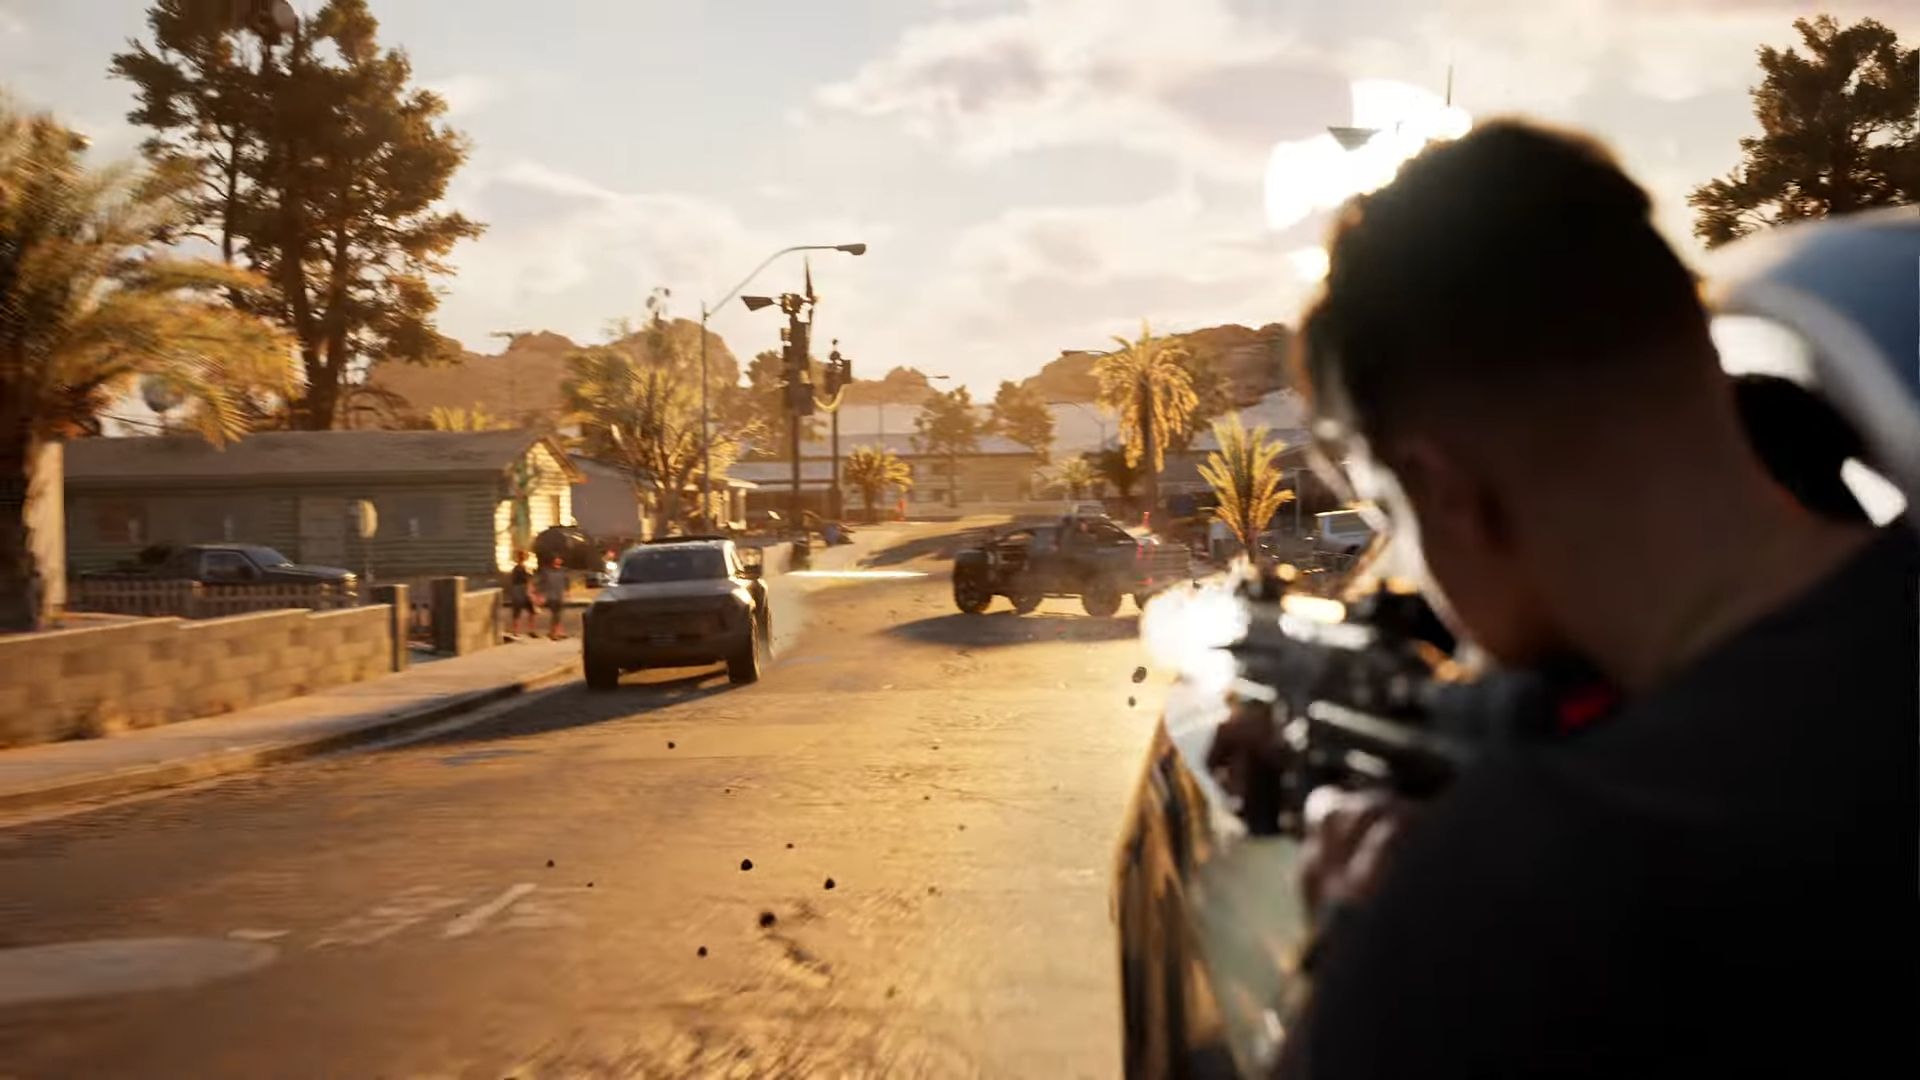 Gameplay screen shot of MindsEye with camera positioned over a young man's shoulder as fires a weapon towards enemy cars a block down a neighboorhood street.